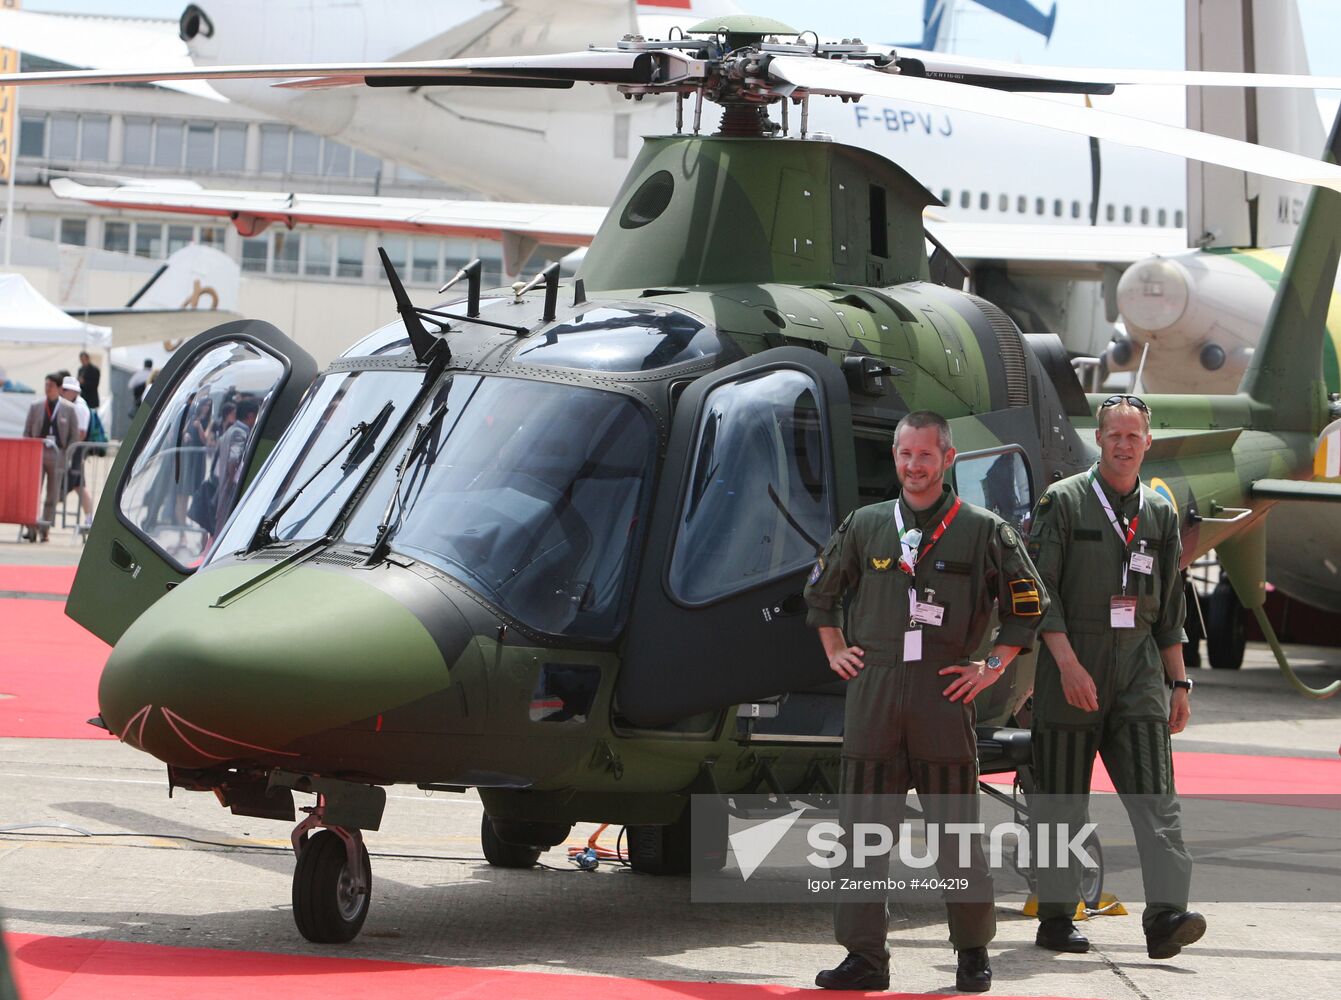 AW109 helicopter exhibited at Paris Air Show